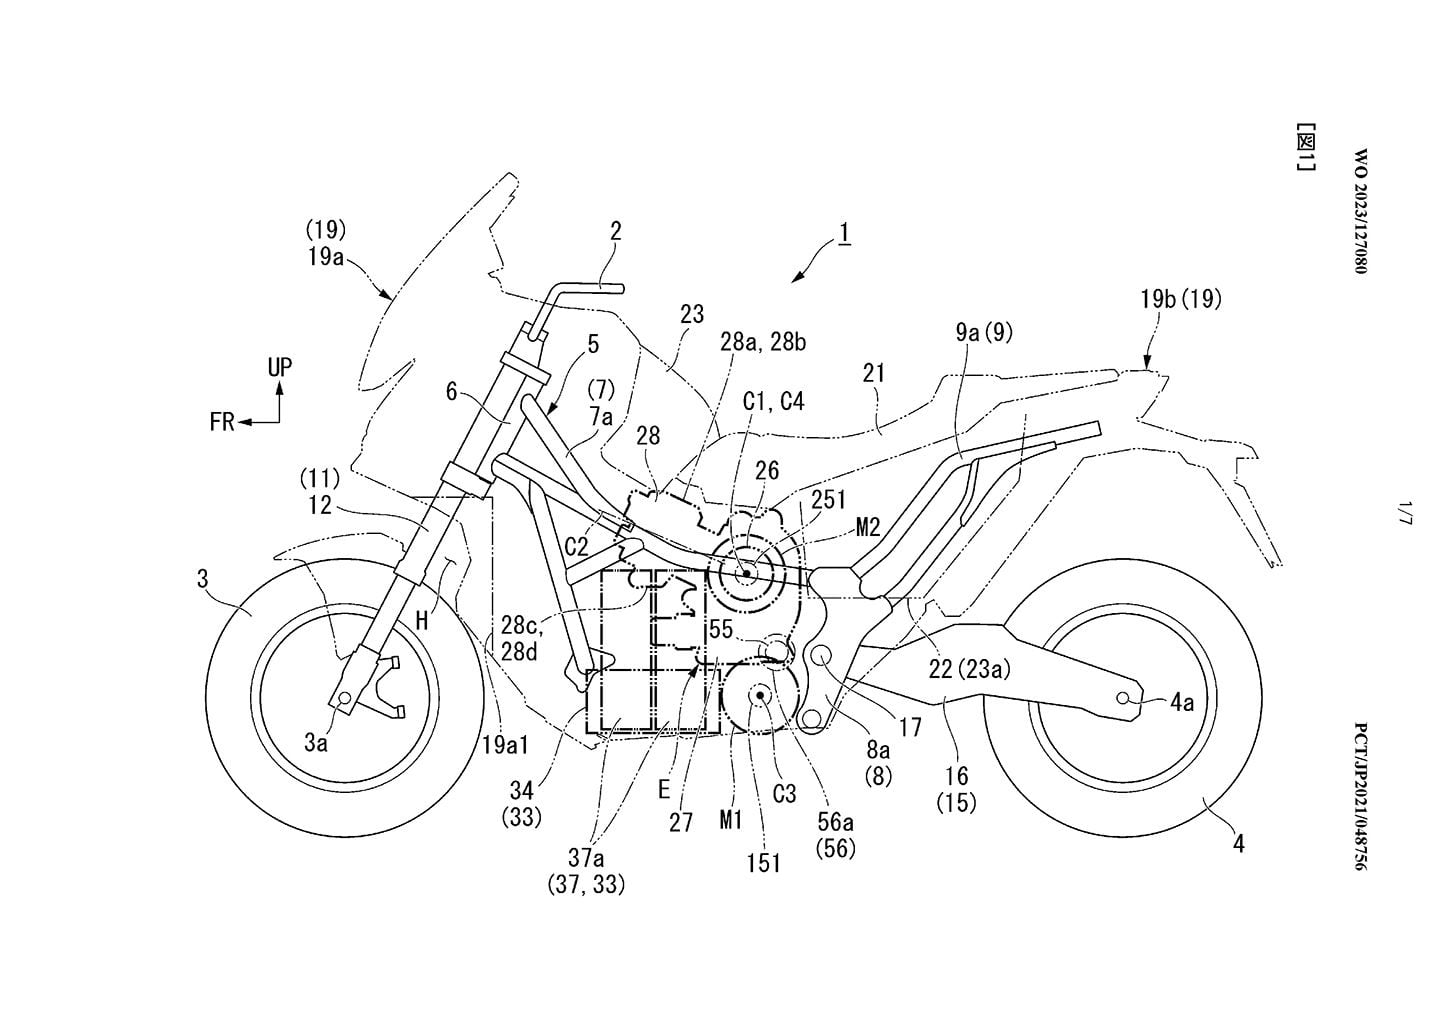 Honda has submitted nine patent drawings showing various dual electric motor hybrid configurations.